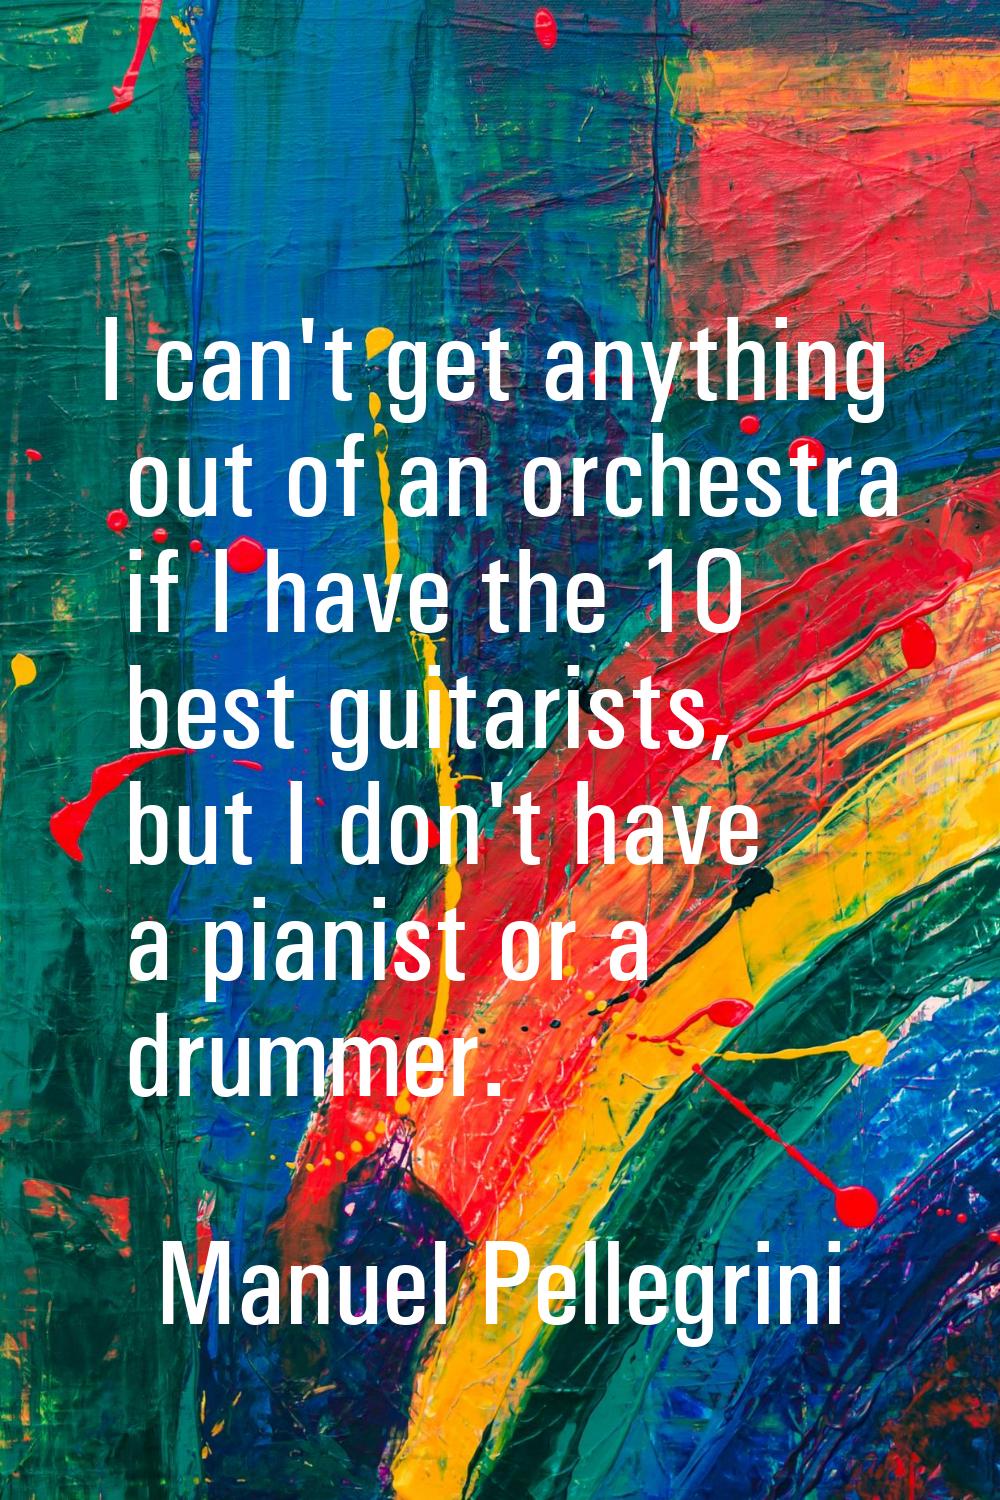 I can't get anything out of an orchestra if I have the 10 best guitarists, but I don't have a piani